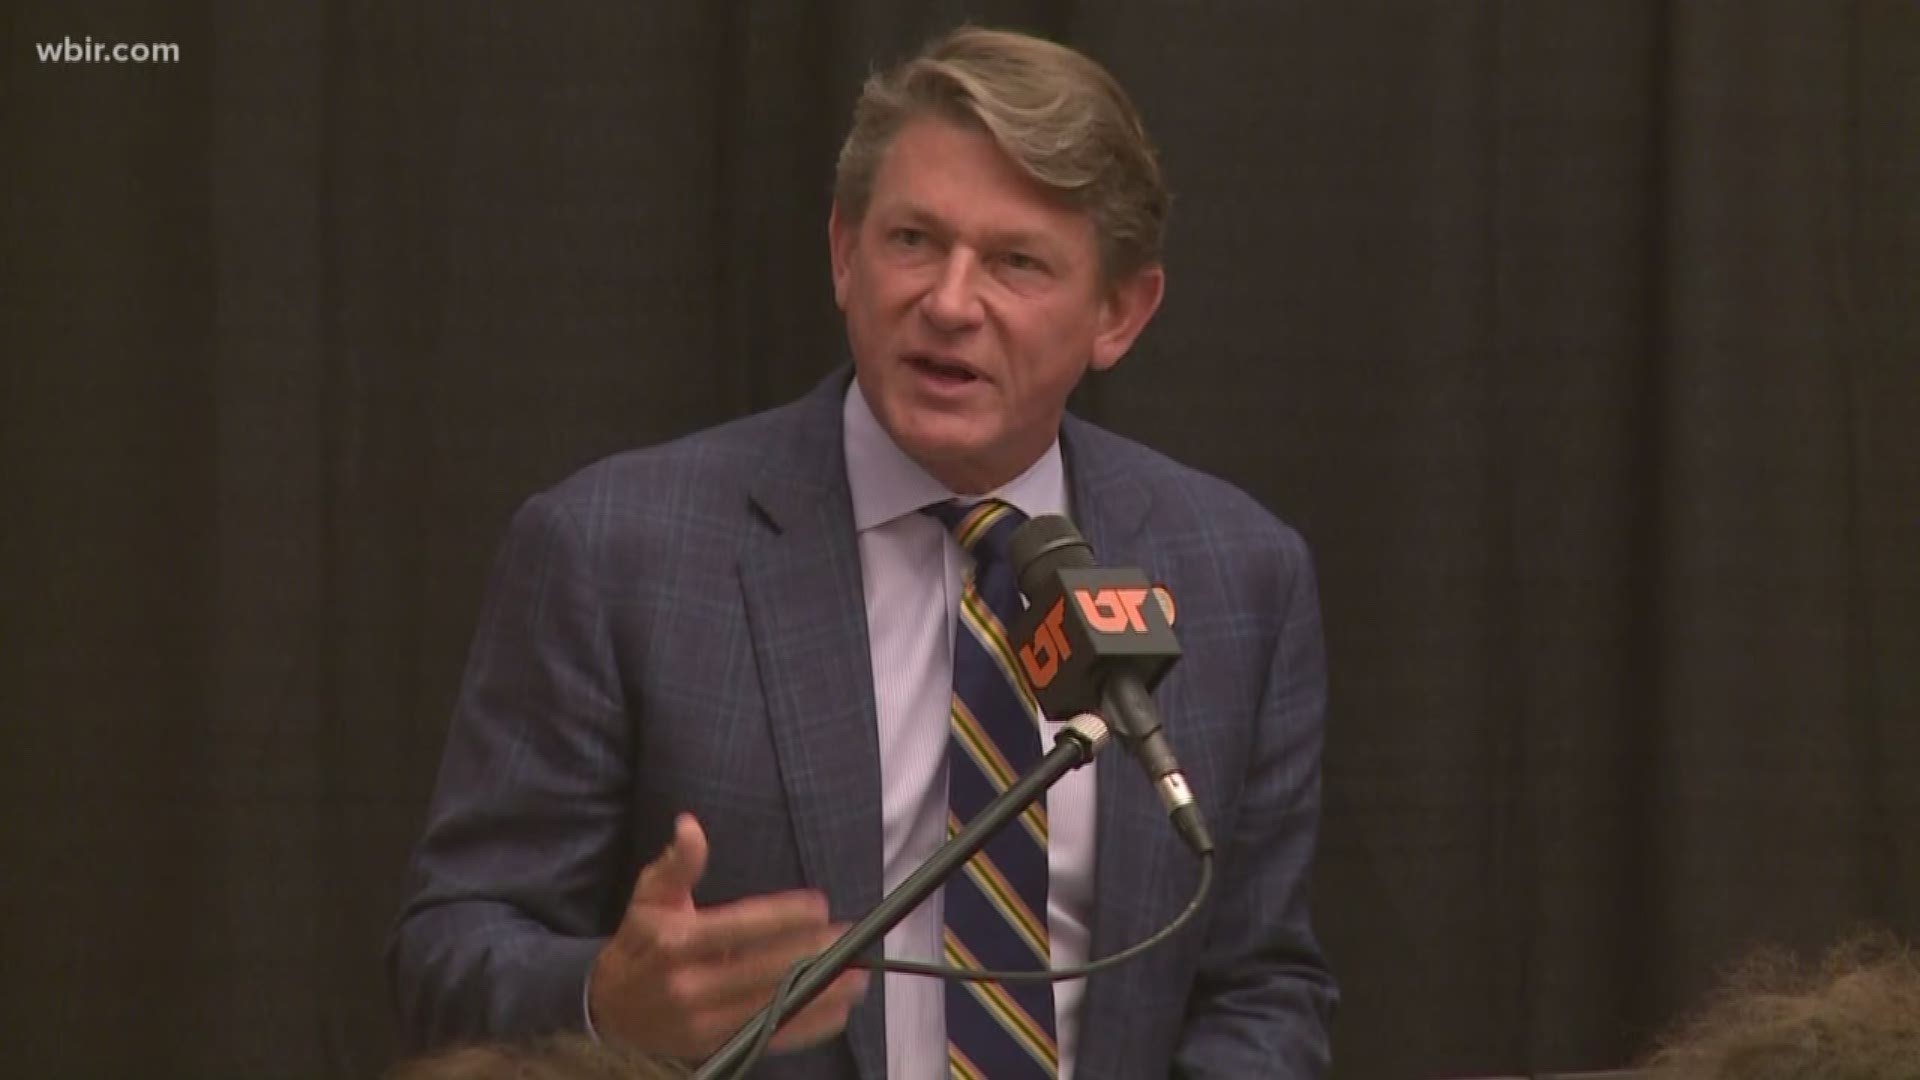 UT Board of Trustees voted to appoint Boyd on Tuesday.